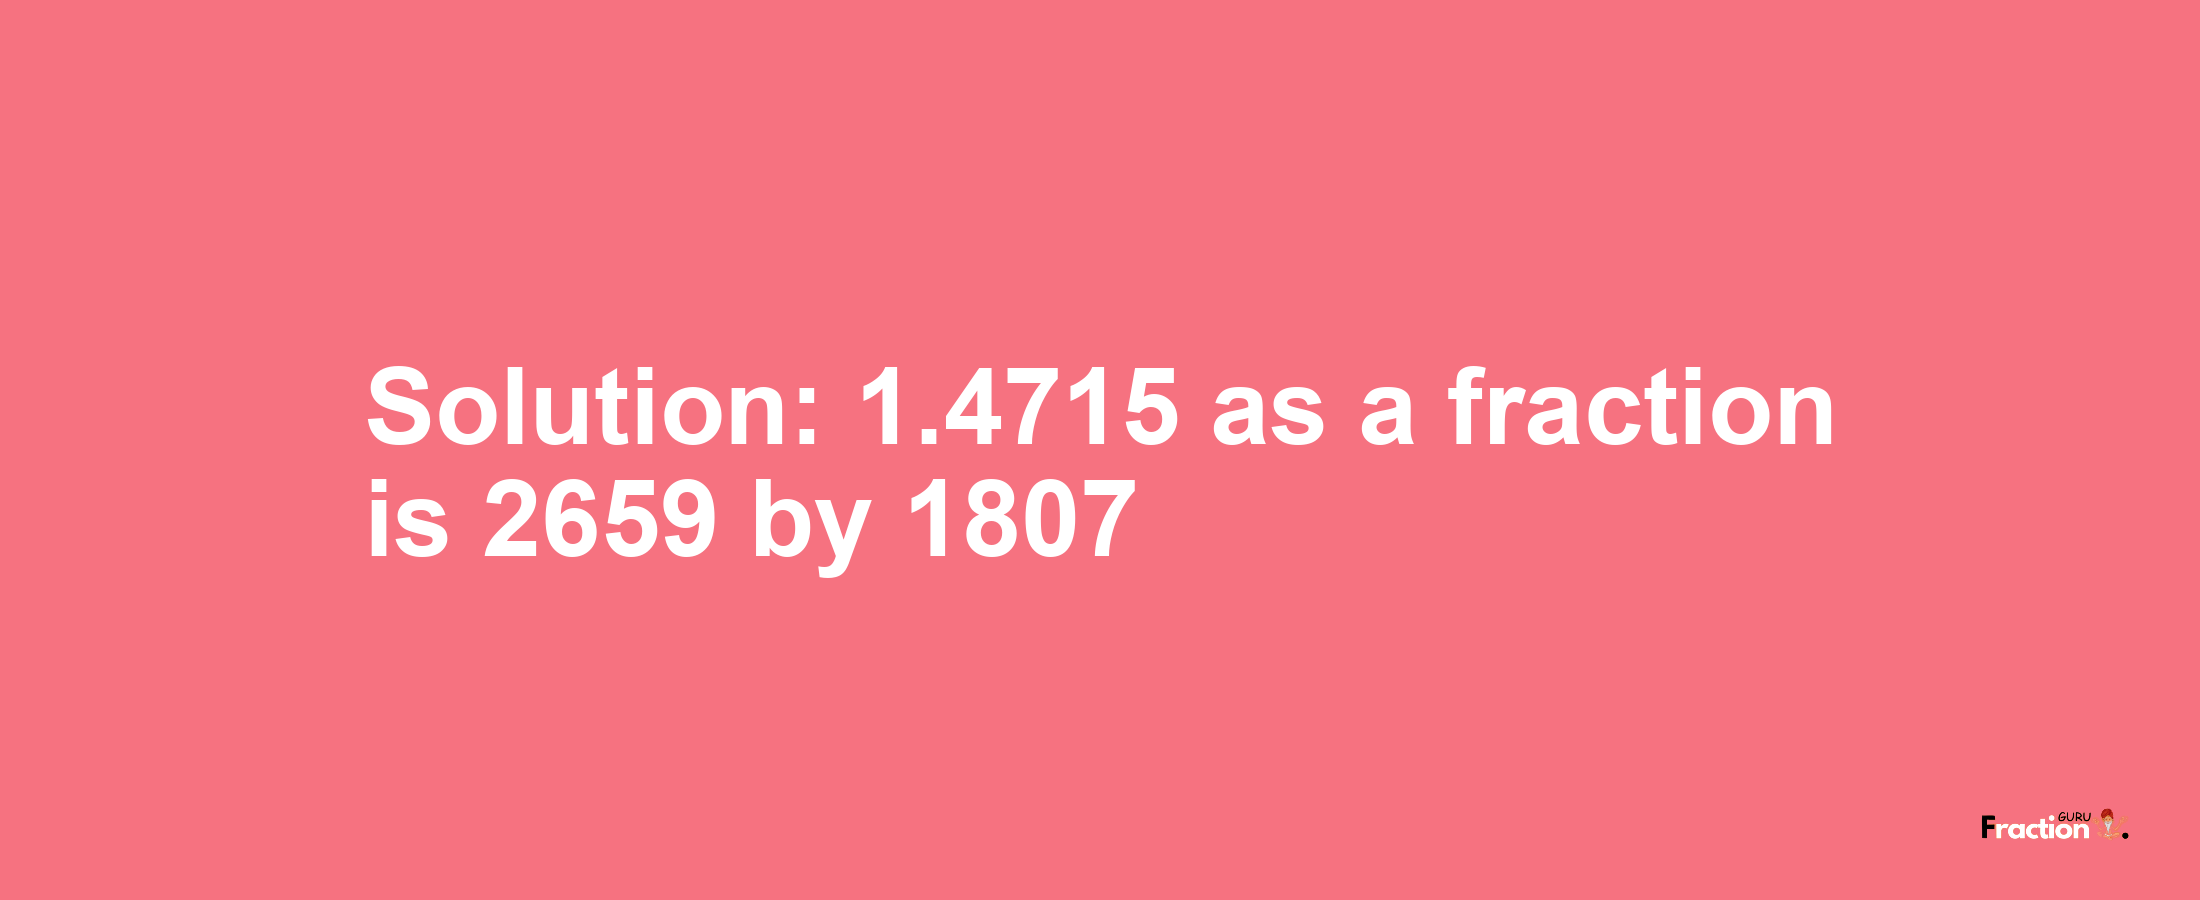 Solution:1.4715 as a fraction is 2659/1807